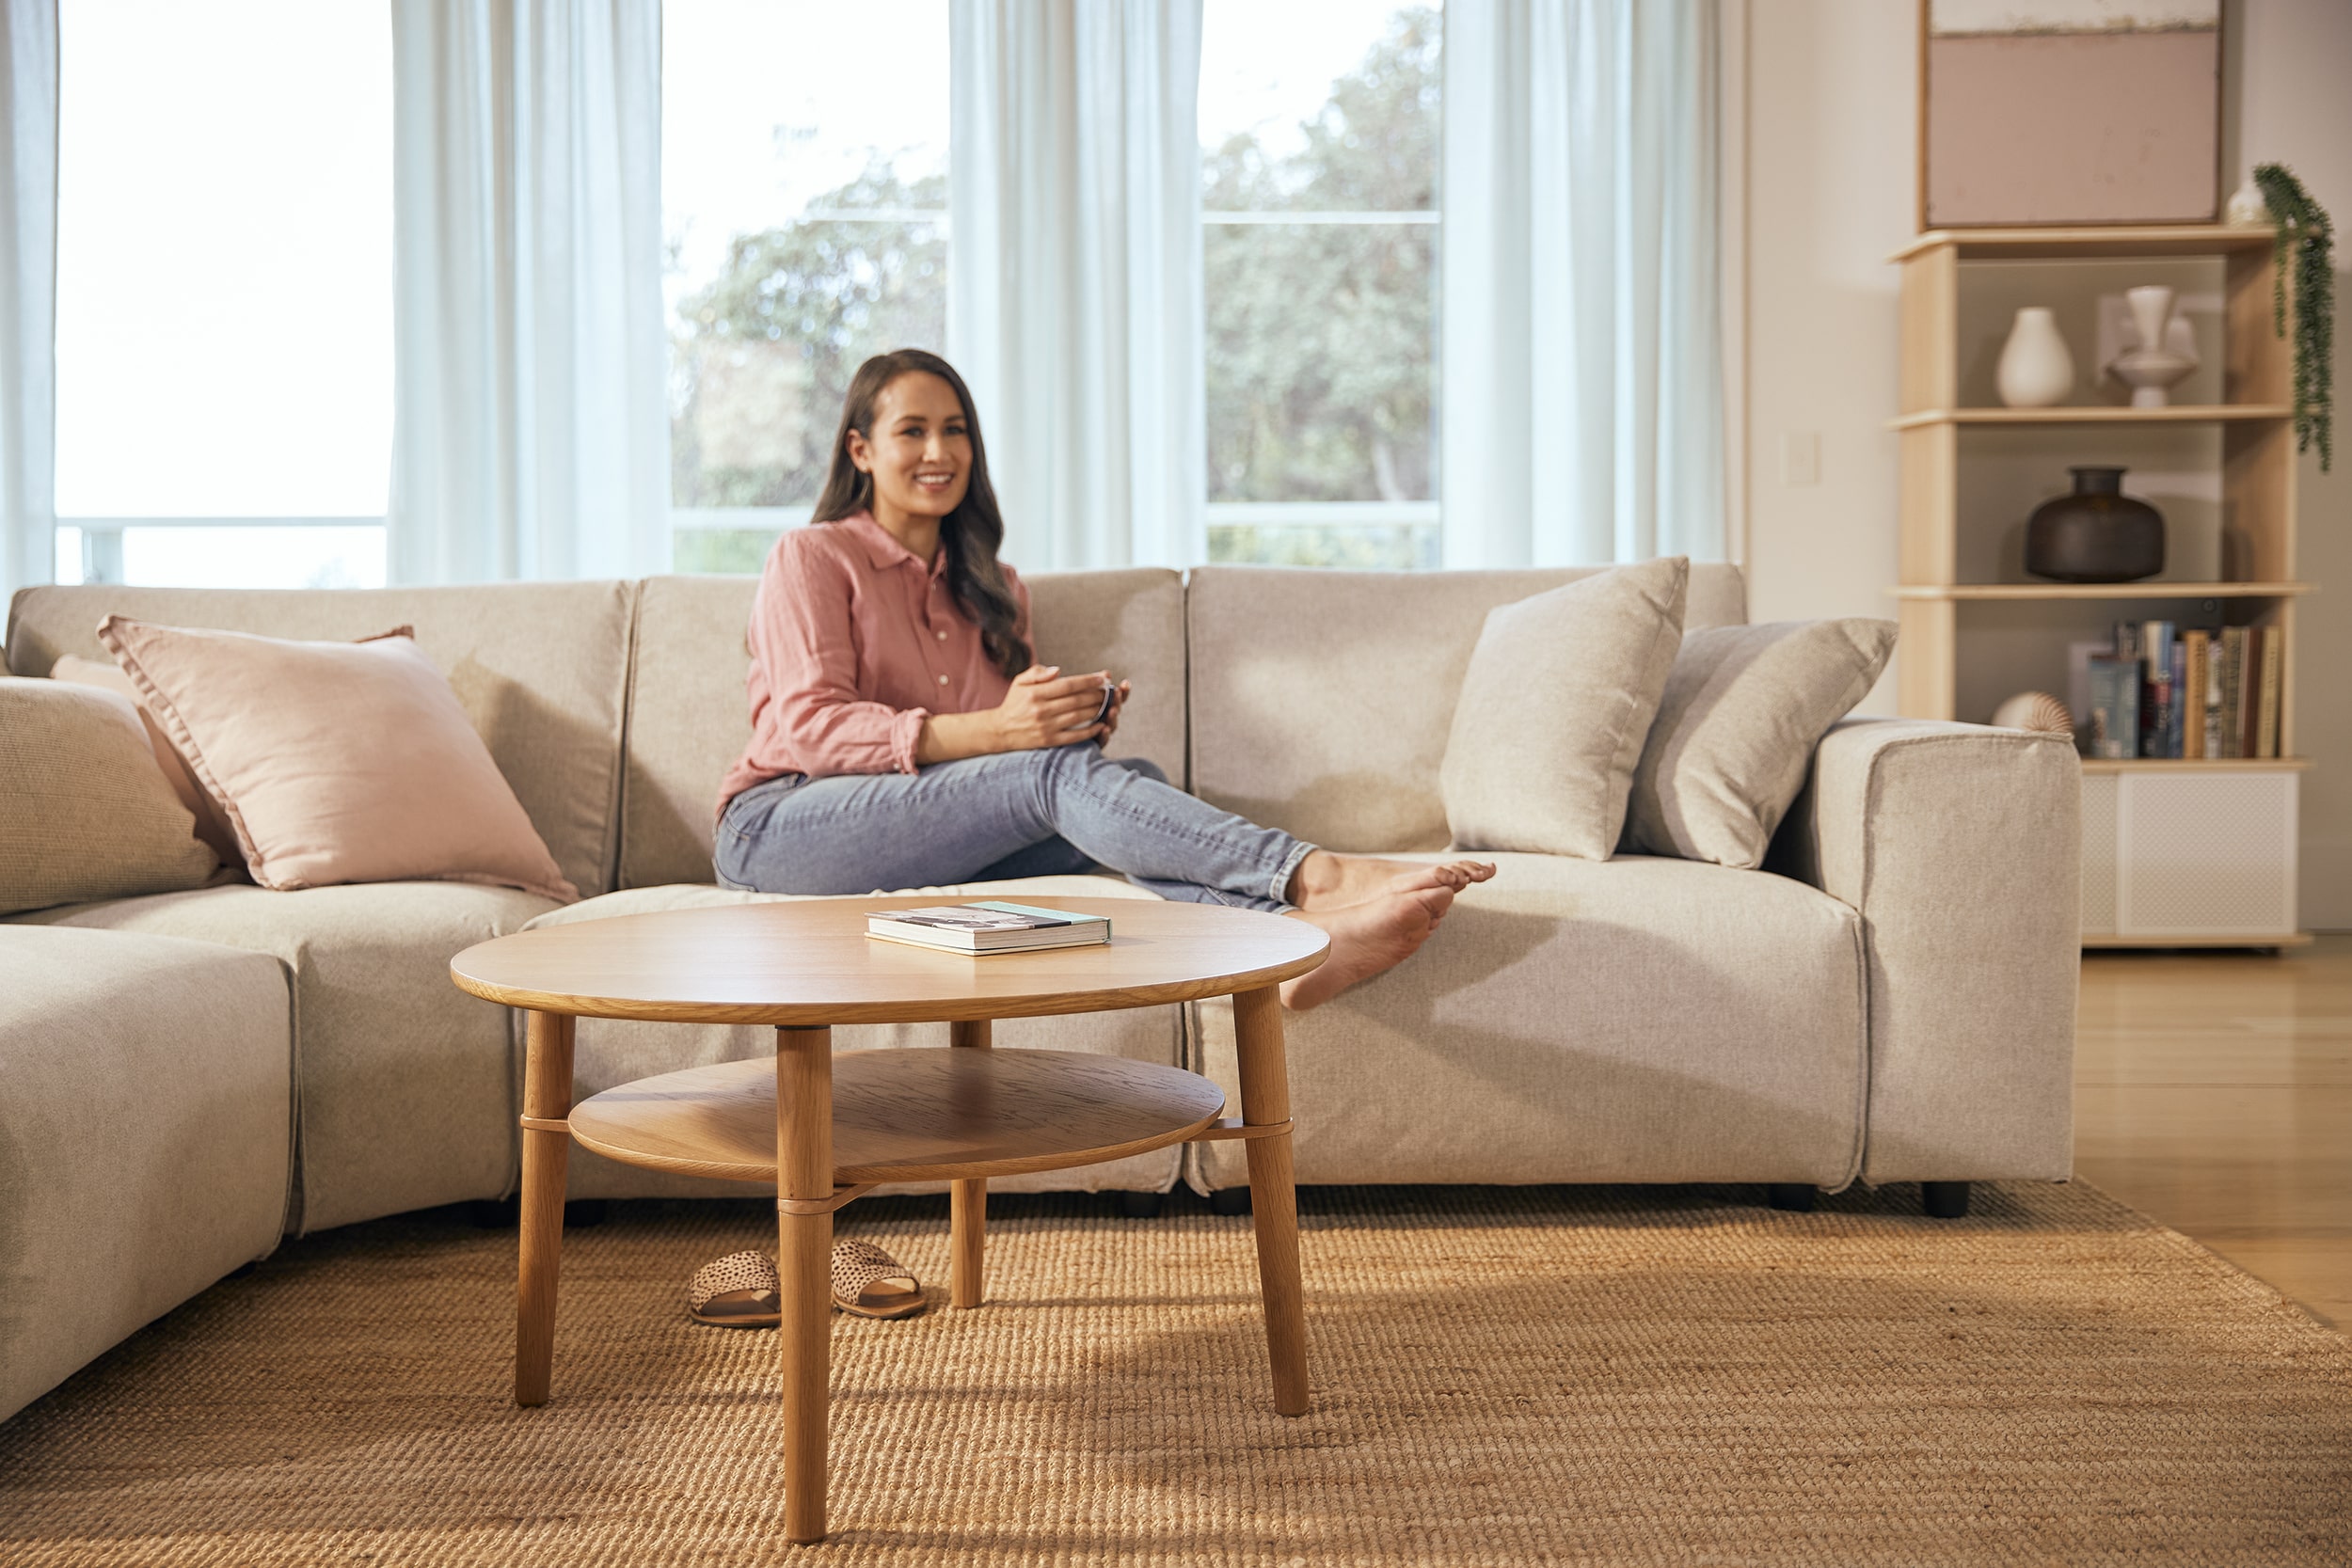 A smiling woman relaxes on her Koala sofa and behind her wood coffee table from Koala